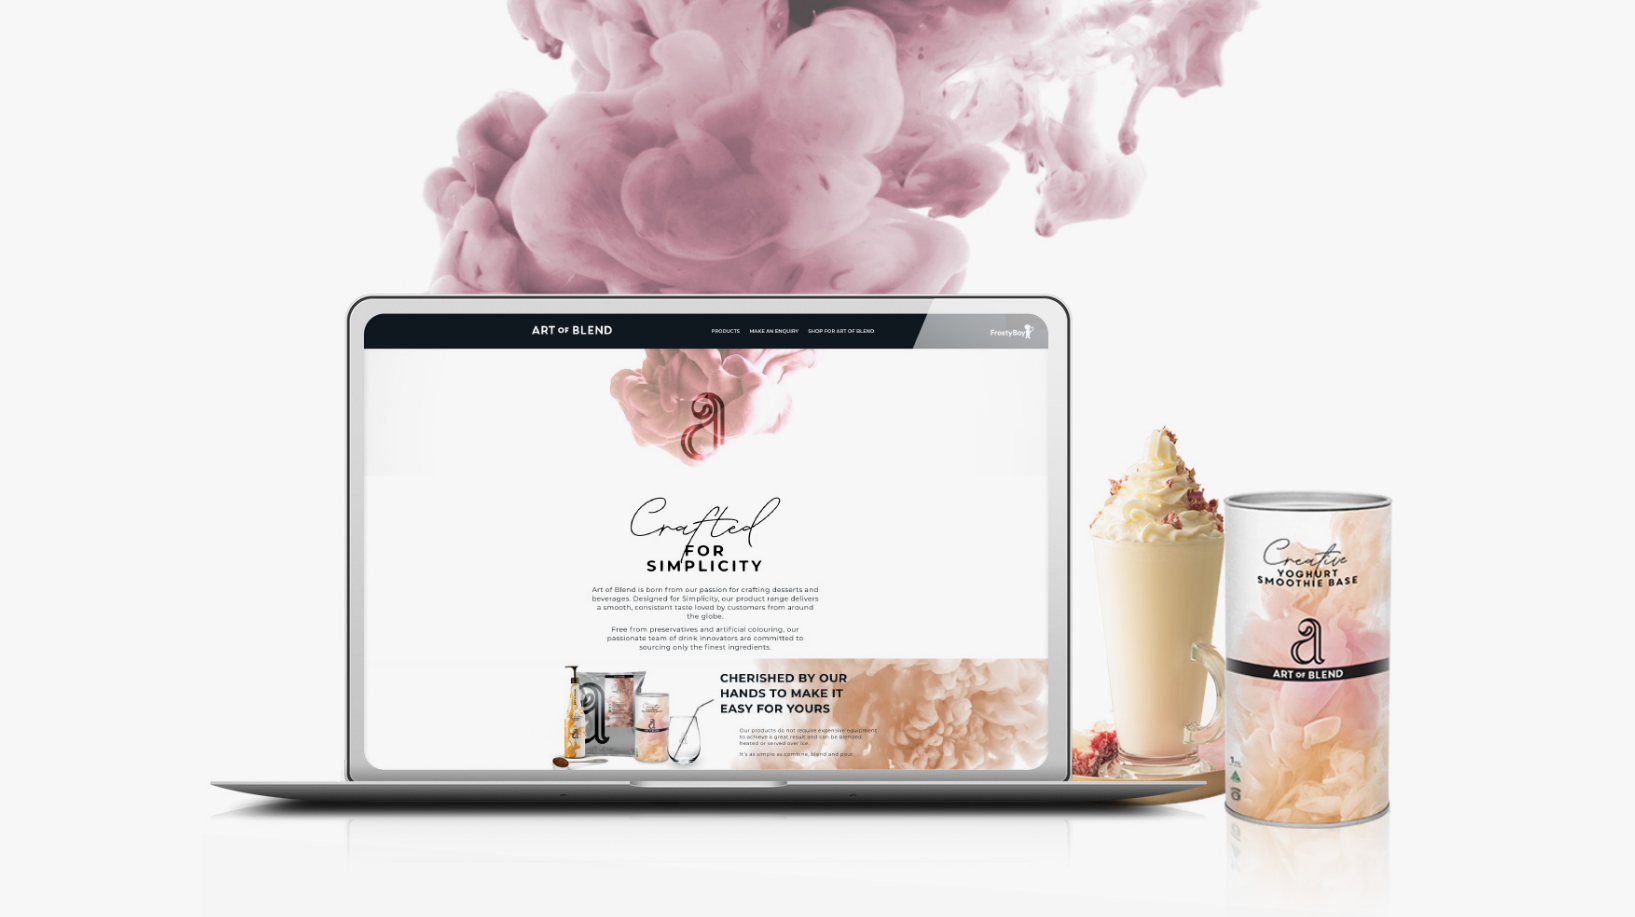 A laptop screen displaying the website for Art of Blend. On the right-hand side, there is a frappe coffee cup and a package of Art of Blend coffee mix.